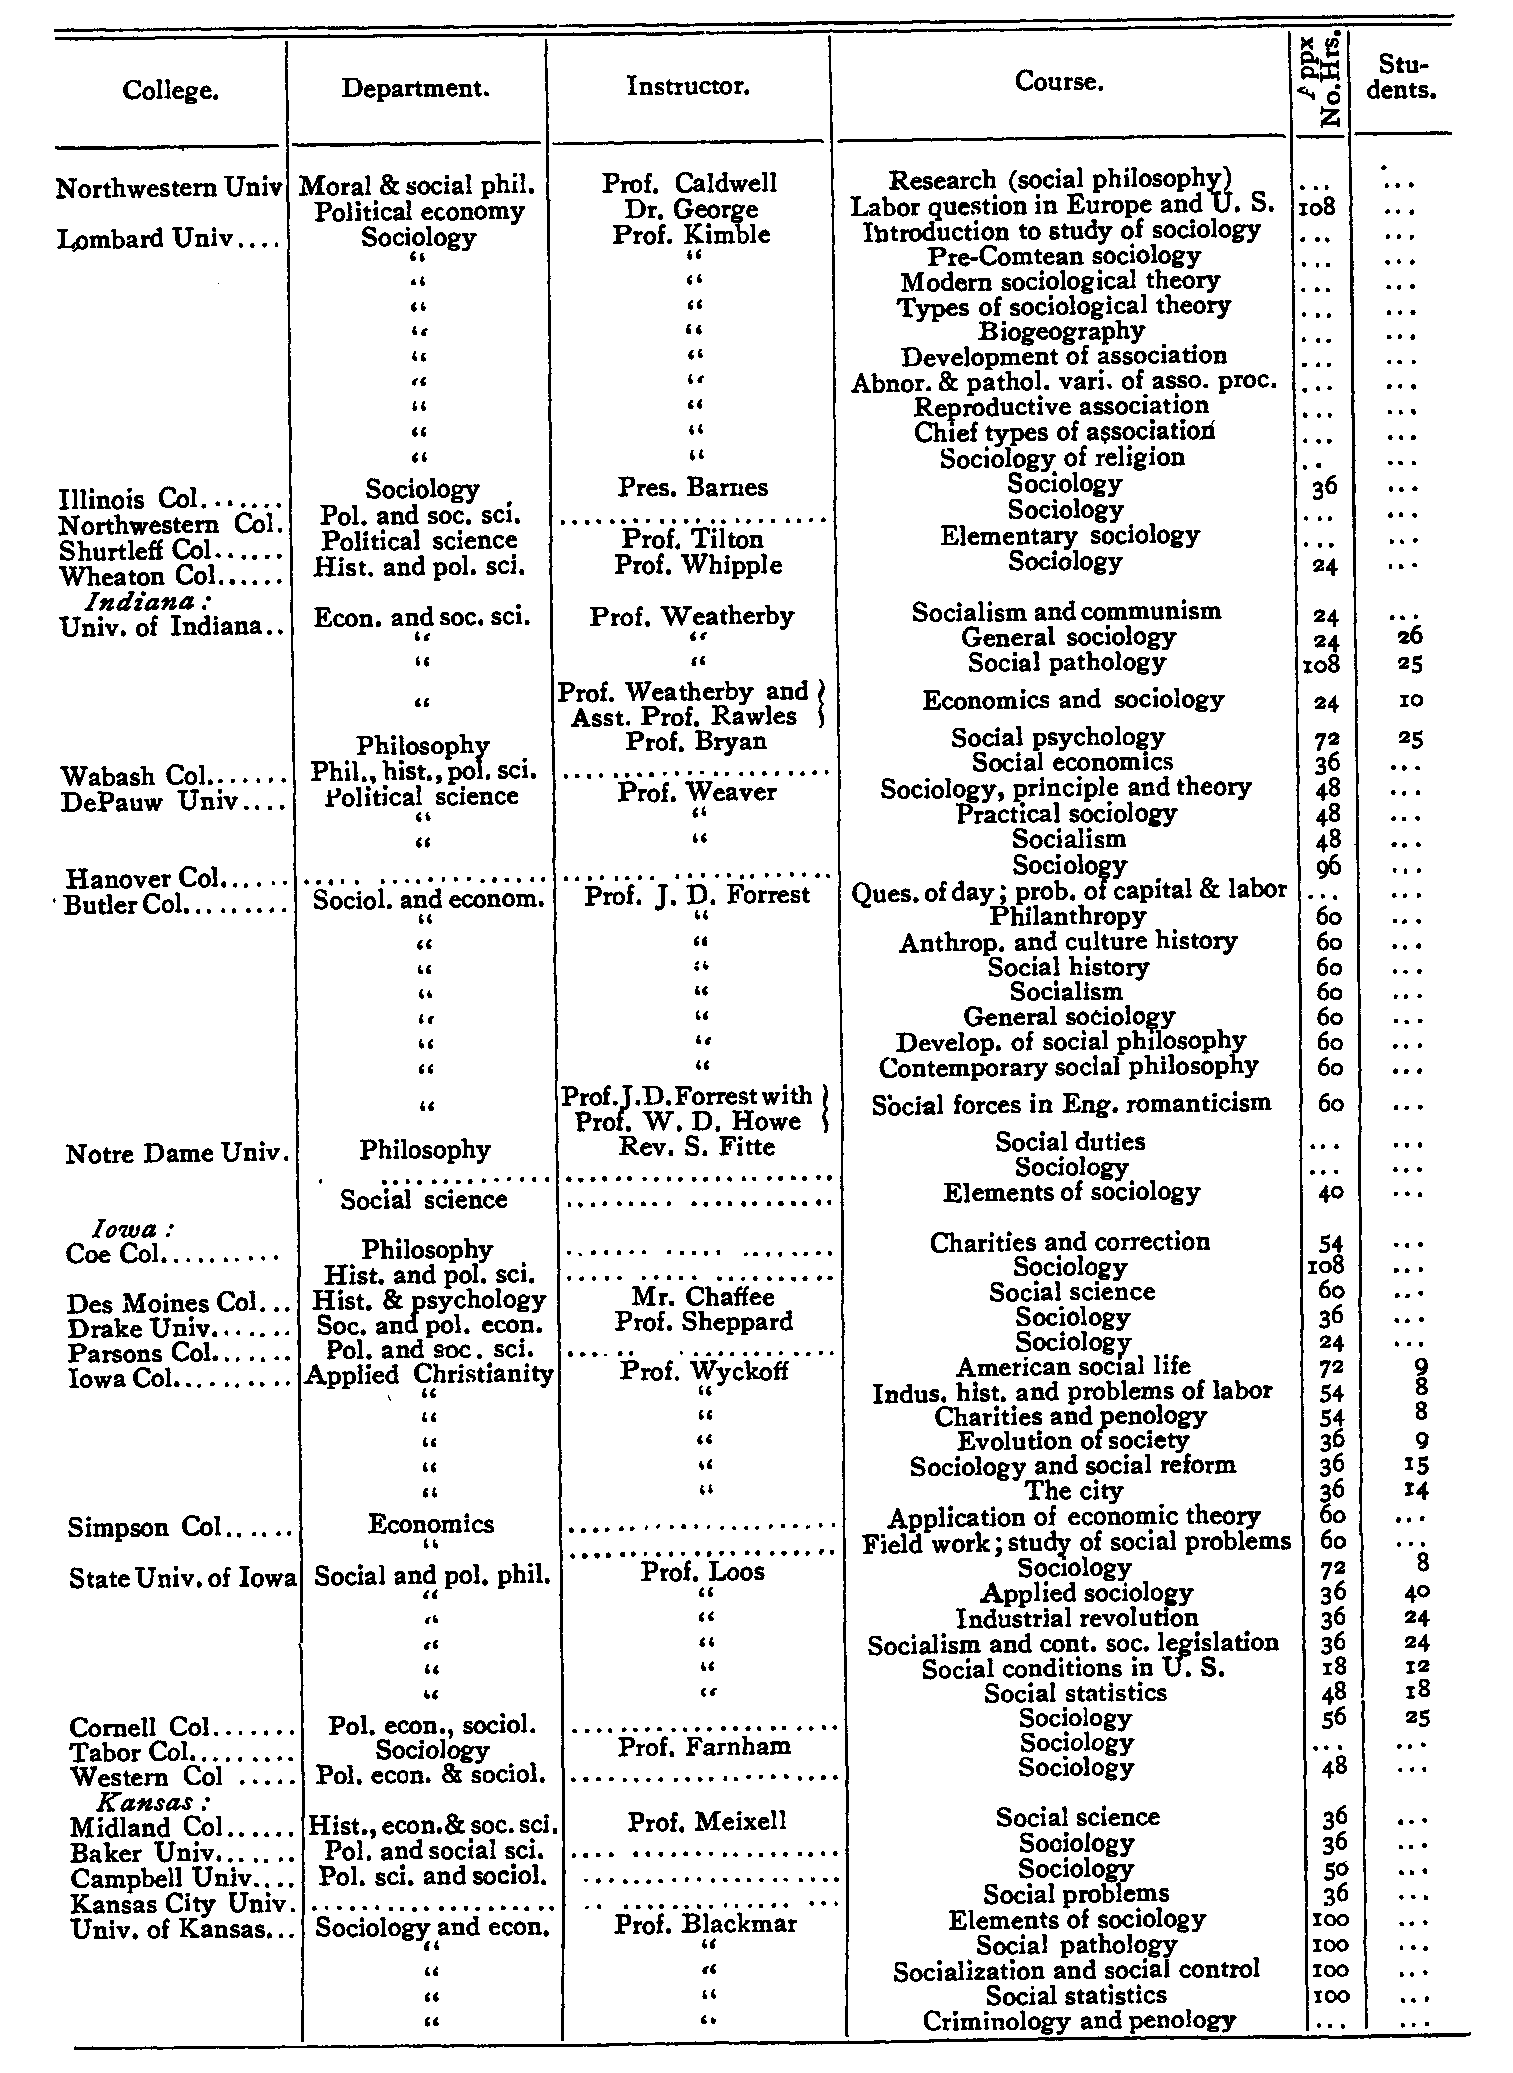 Schedule of Courses in Sociology in 1907, part 3